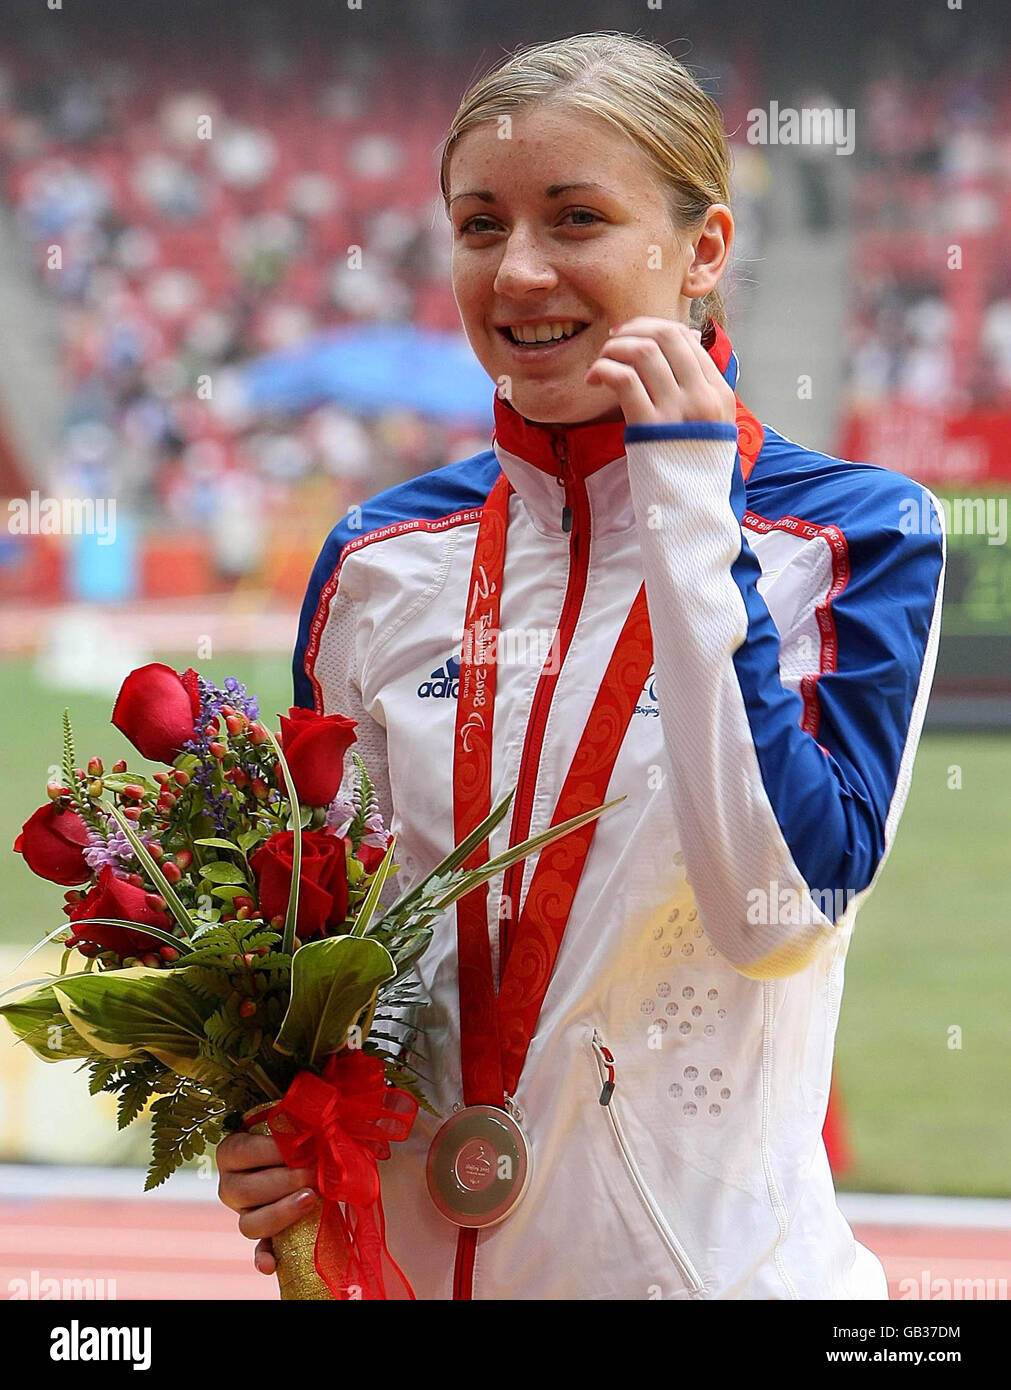 Great Britain's Libby Clegg celebrates winning Silver during the Women's T12 100M Final in the National Stadium at the Beijing Paralympic Games 2008, China. Stock Photo